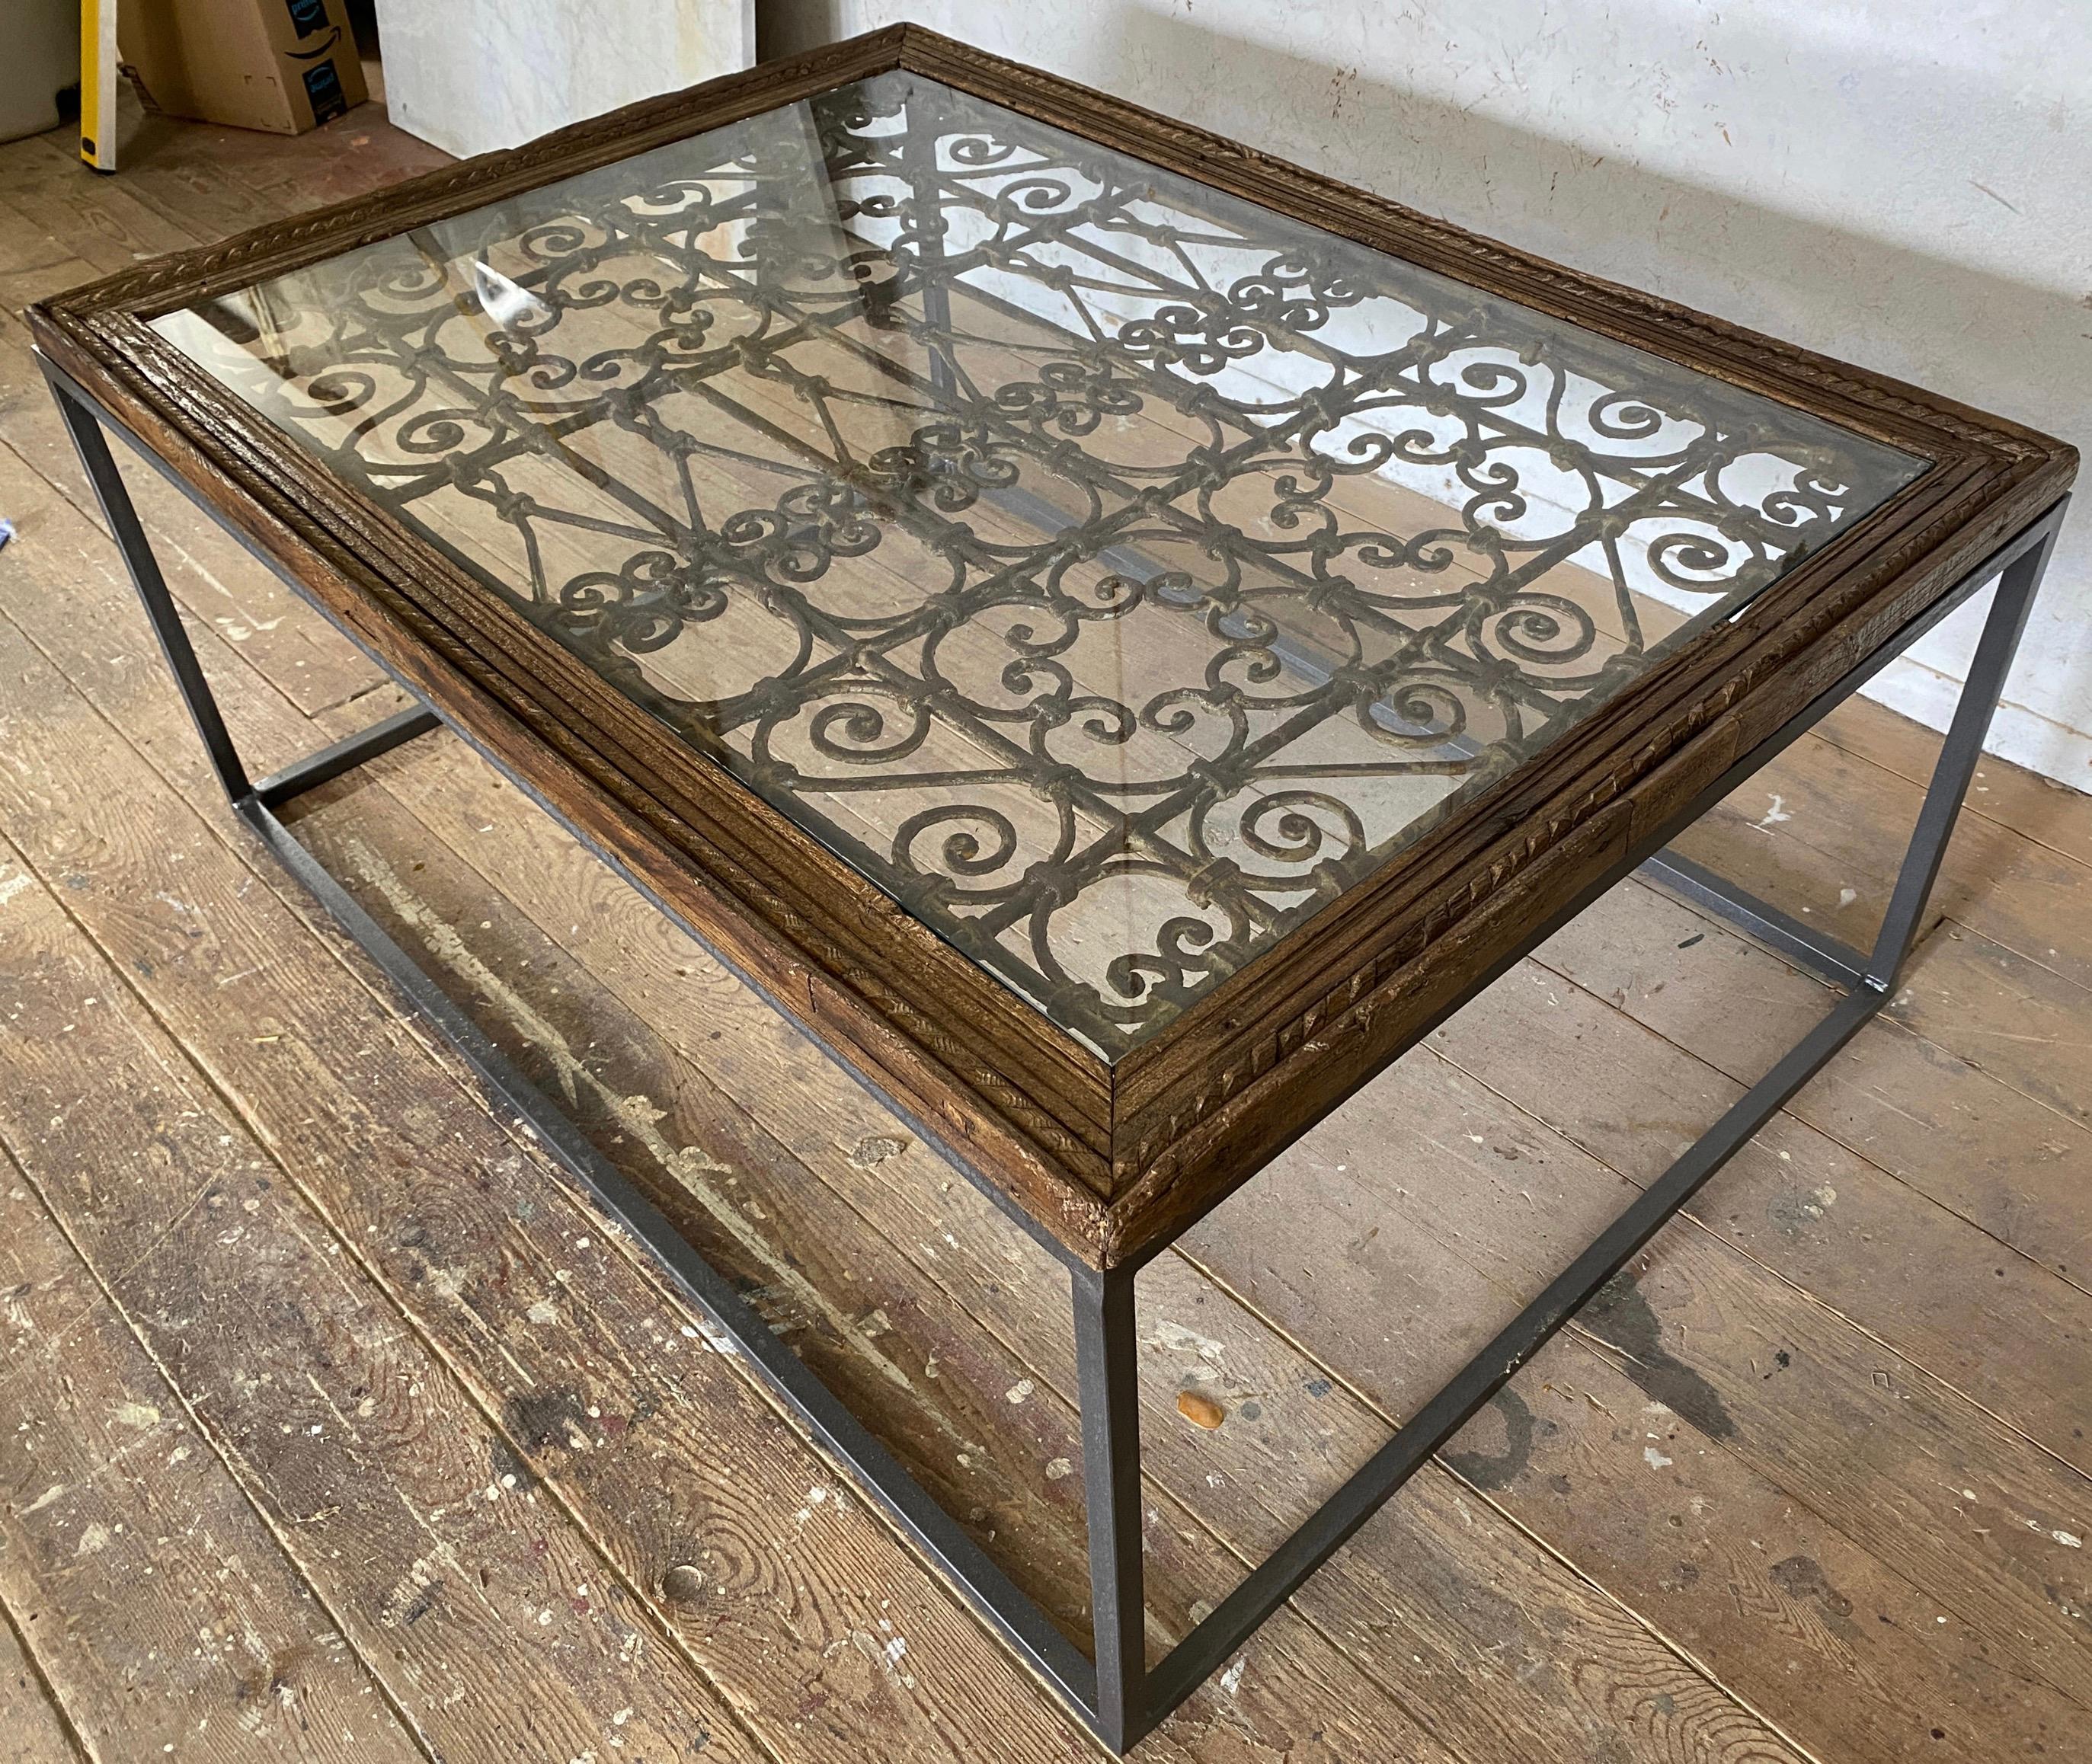 Metal Antique Indian Iron Window Grate Coffee Table For Sale